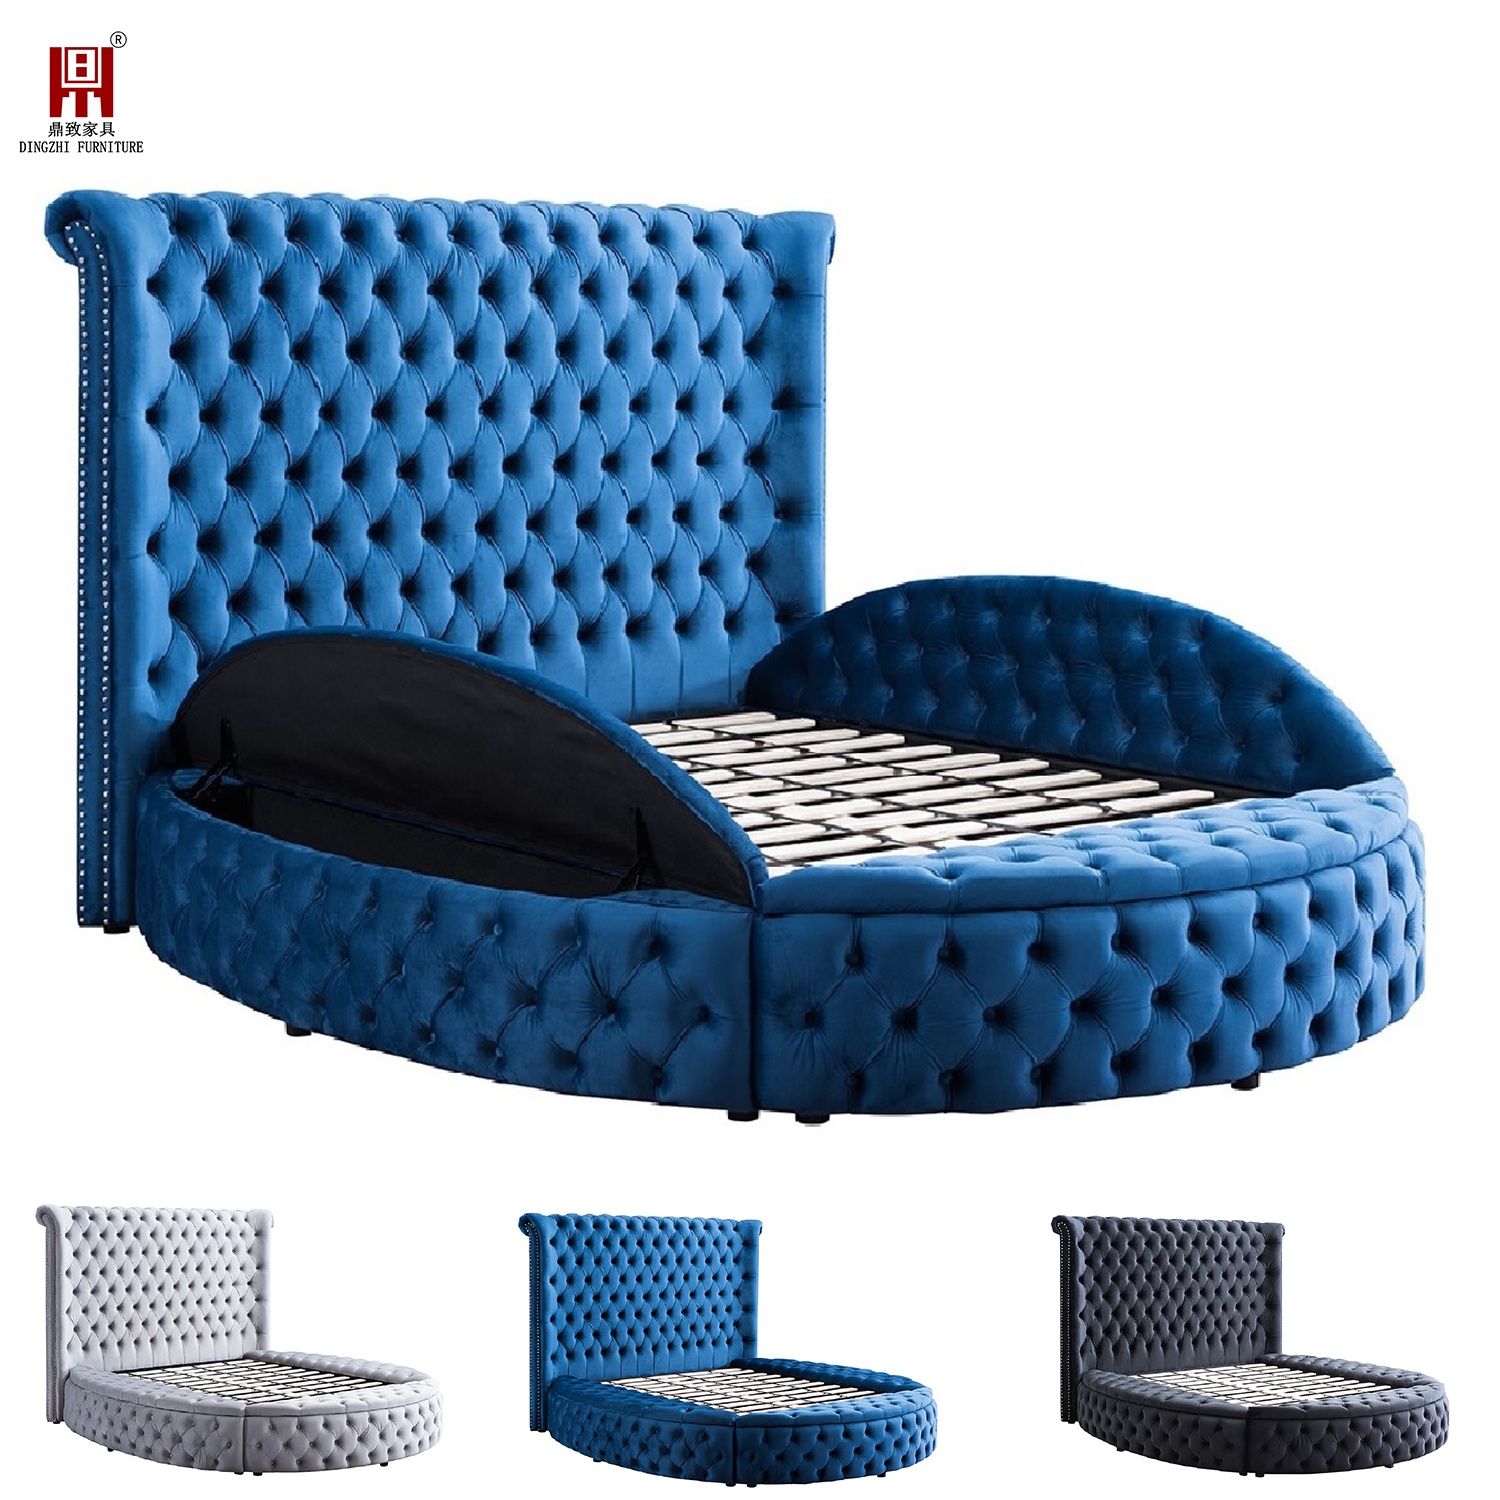 2020 Hot Selling  Luxury Wood Round Velvet King Size Bed With Storage For Hotel 8